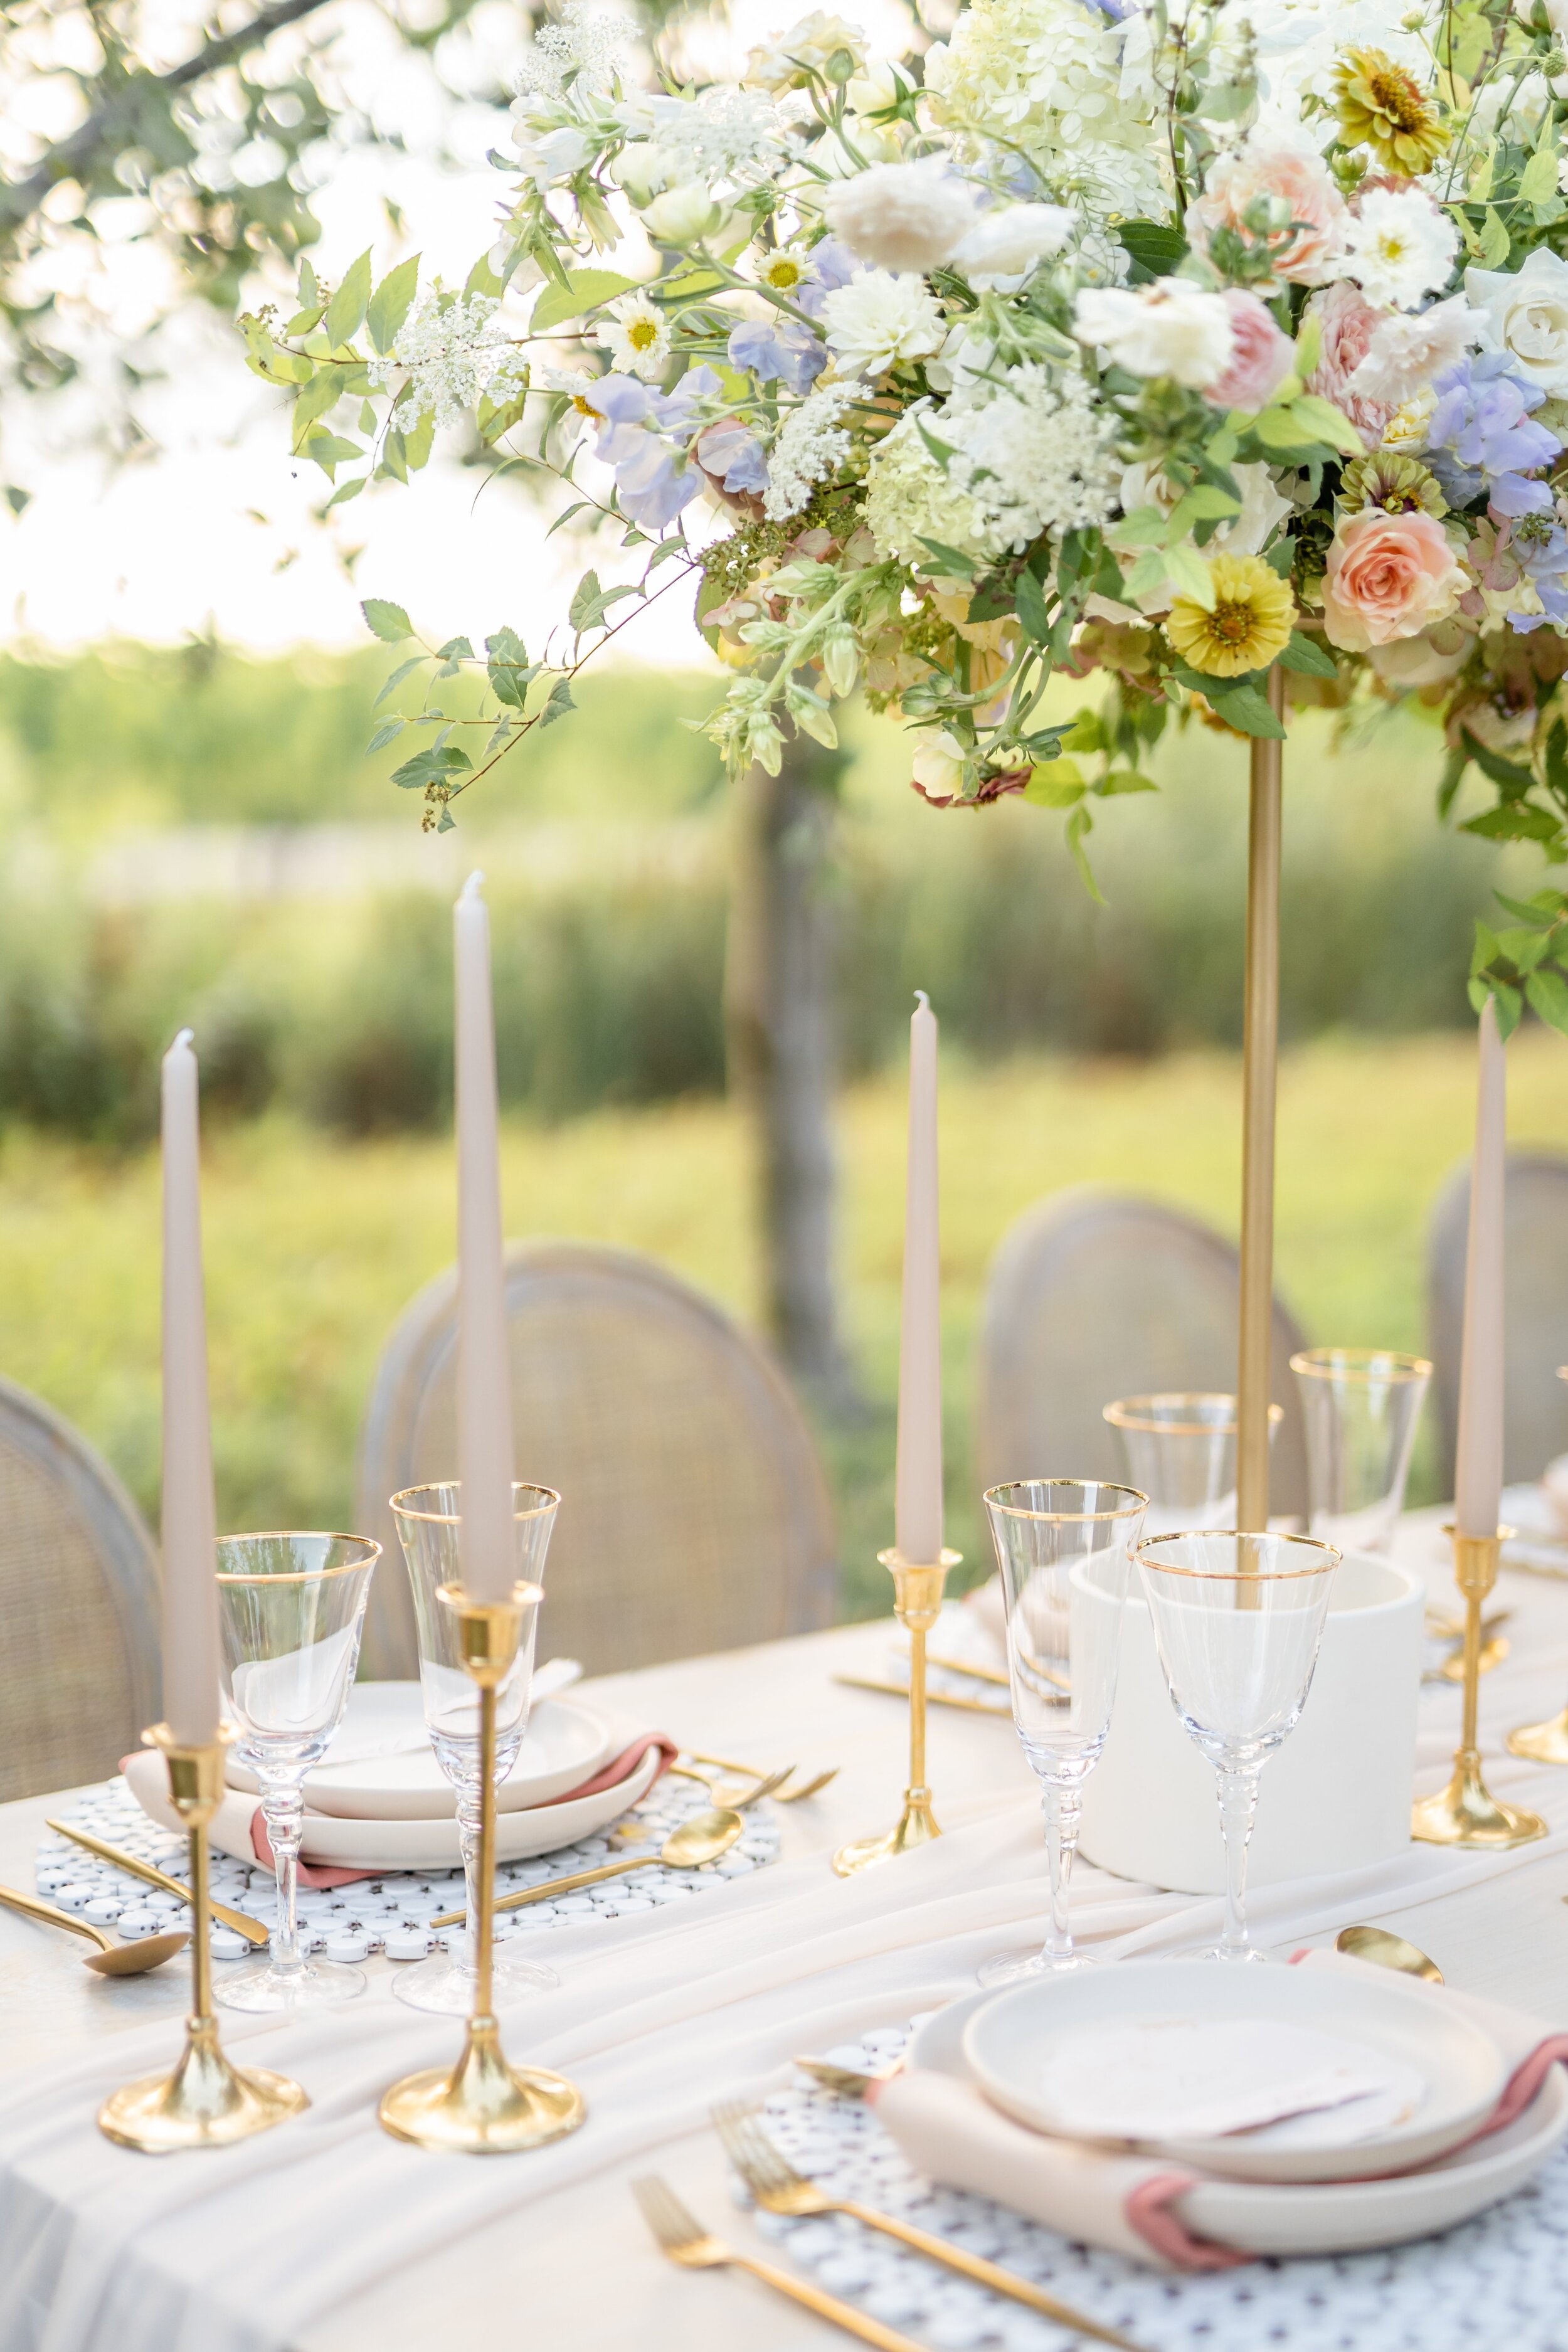 Delicate Luxe Micro-Wedding Inspired by Amalfis Lush, Romantic landscapes | Dylan & Sandra Photography -60.jpg